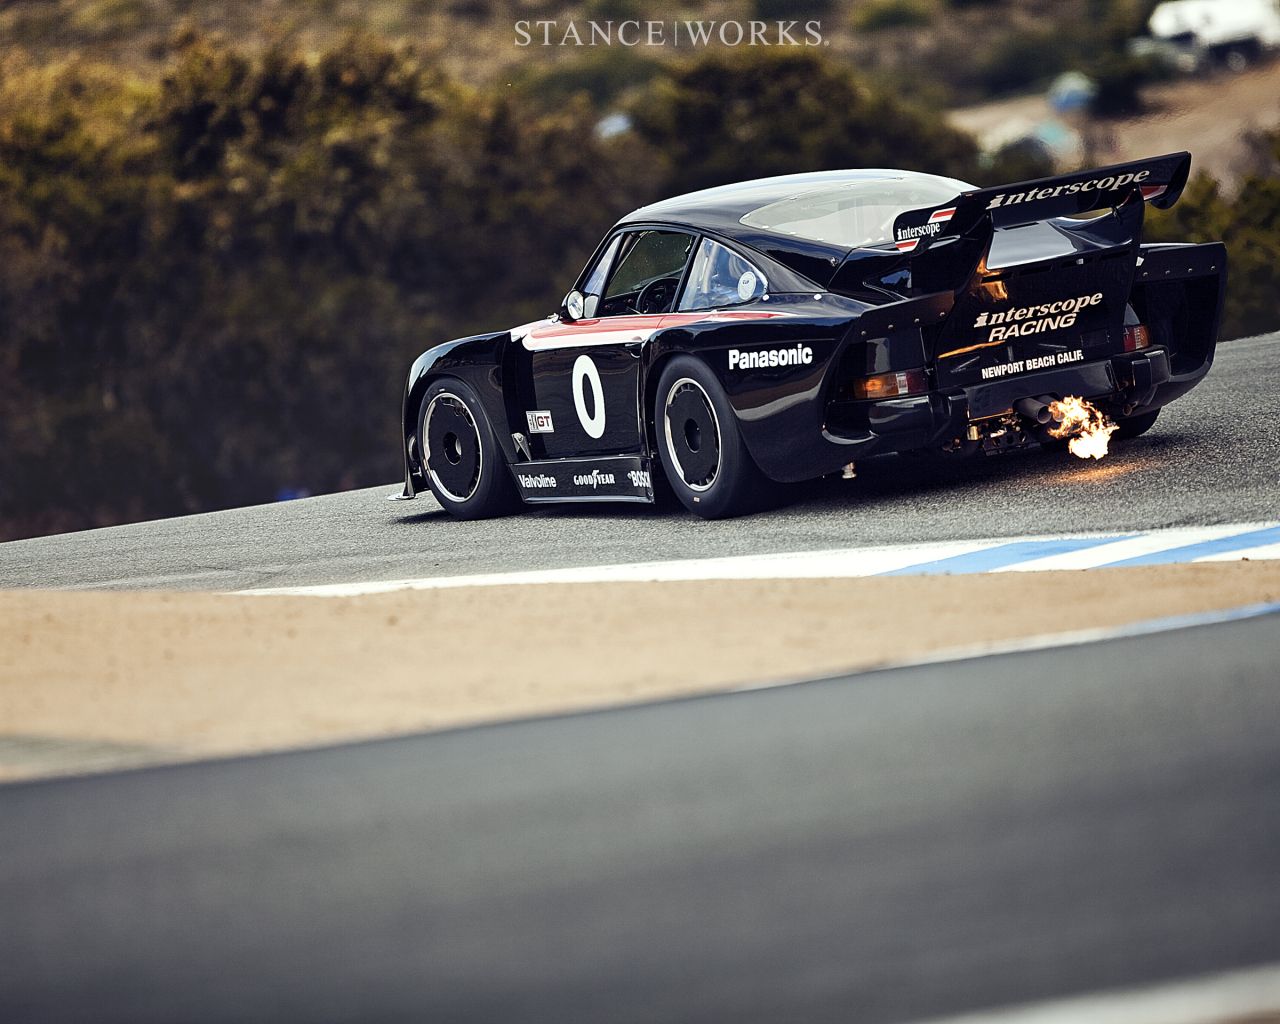 Free download StanceWorks Wallpaper The Interscope Porsche 935 Spitting Flames [2880x1920] for your Desktop, Mobile & Tablet. Explore StanceWorks Wallpaper. Stanced Car Wallpaper, Stance Wallpaper, StanceNation Wallpaper